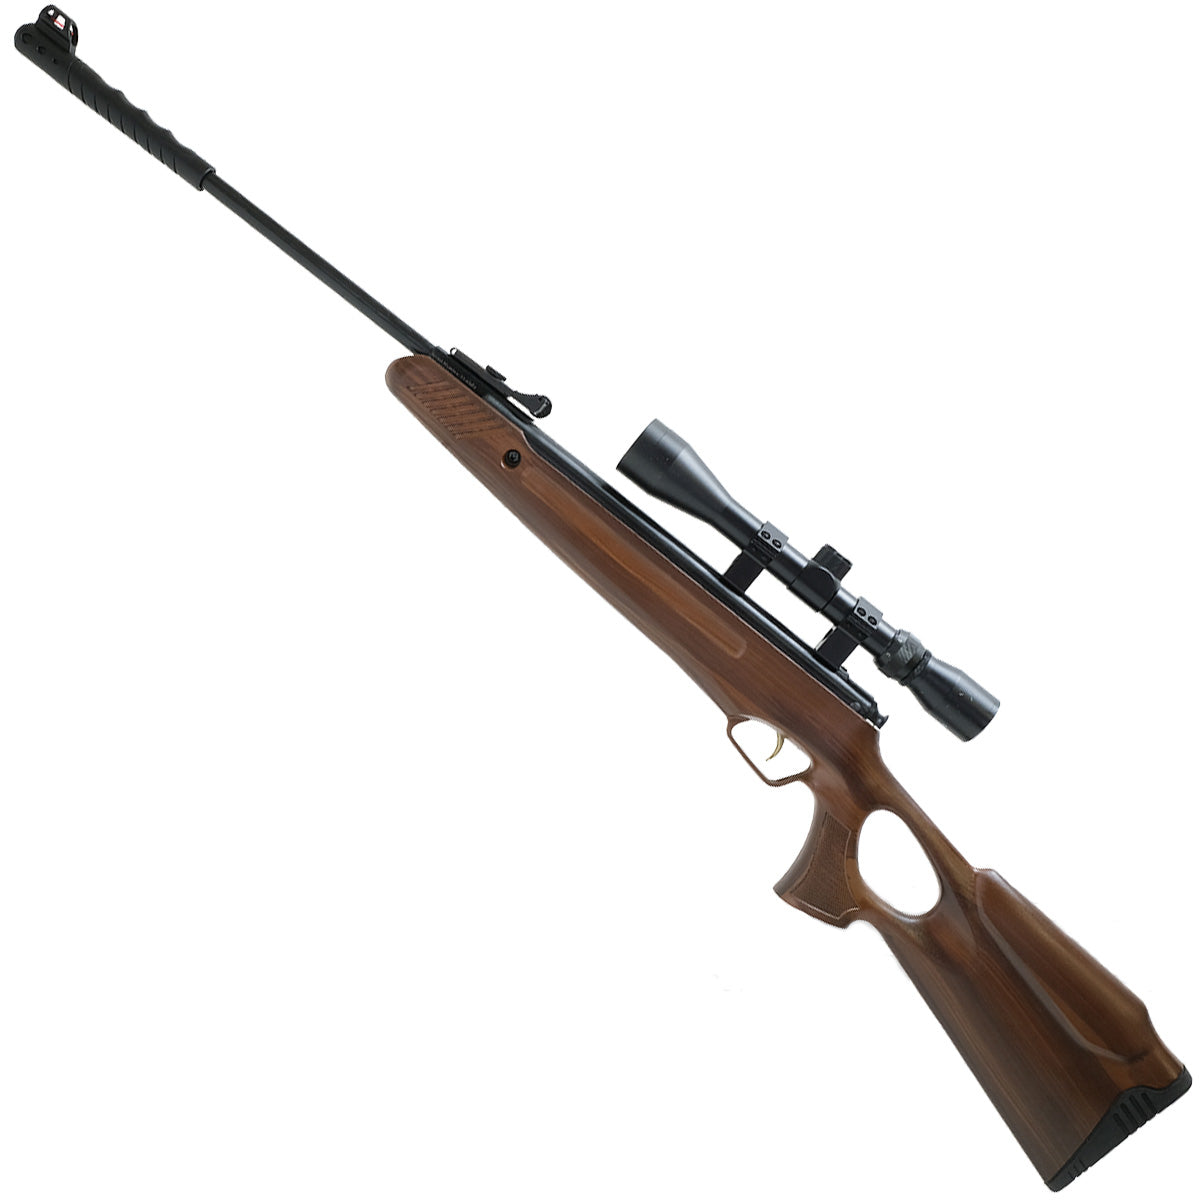 SALIX, TRIMEX ARMS TX05 BREAK BARREL SPRING AIR RIFLE WITH SYNTHETIC WOOD LOOK STOCK .177